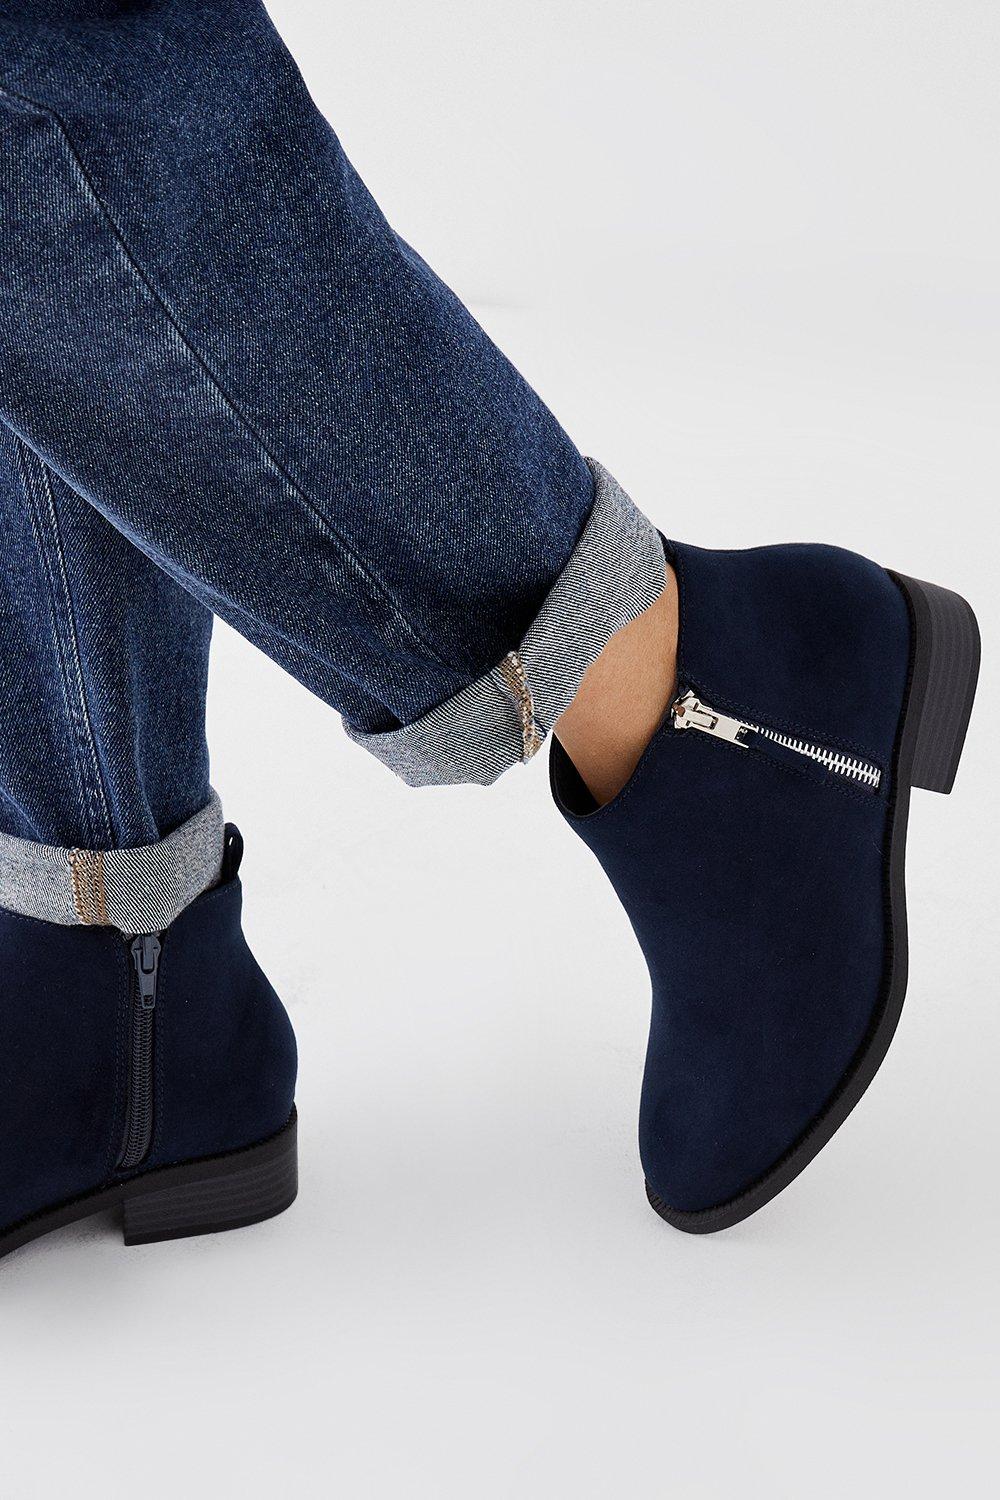 Women's Madrid Zip Up Ankle Boots - navy - 6